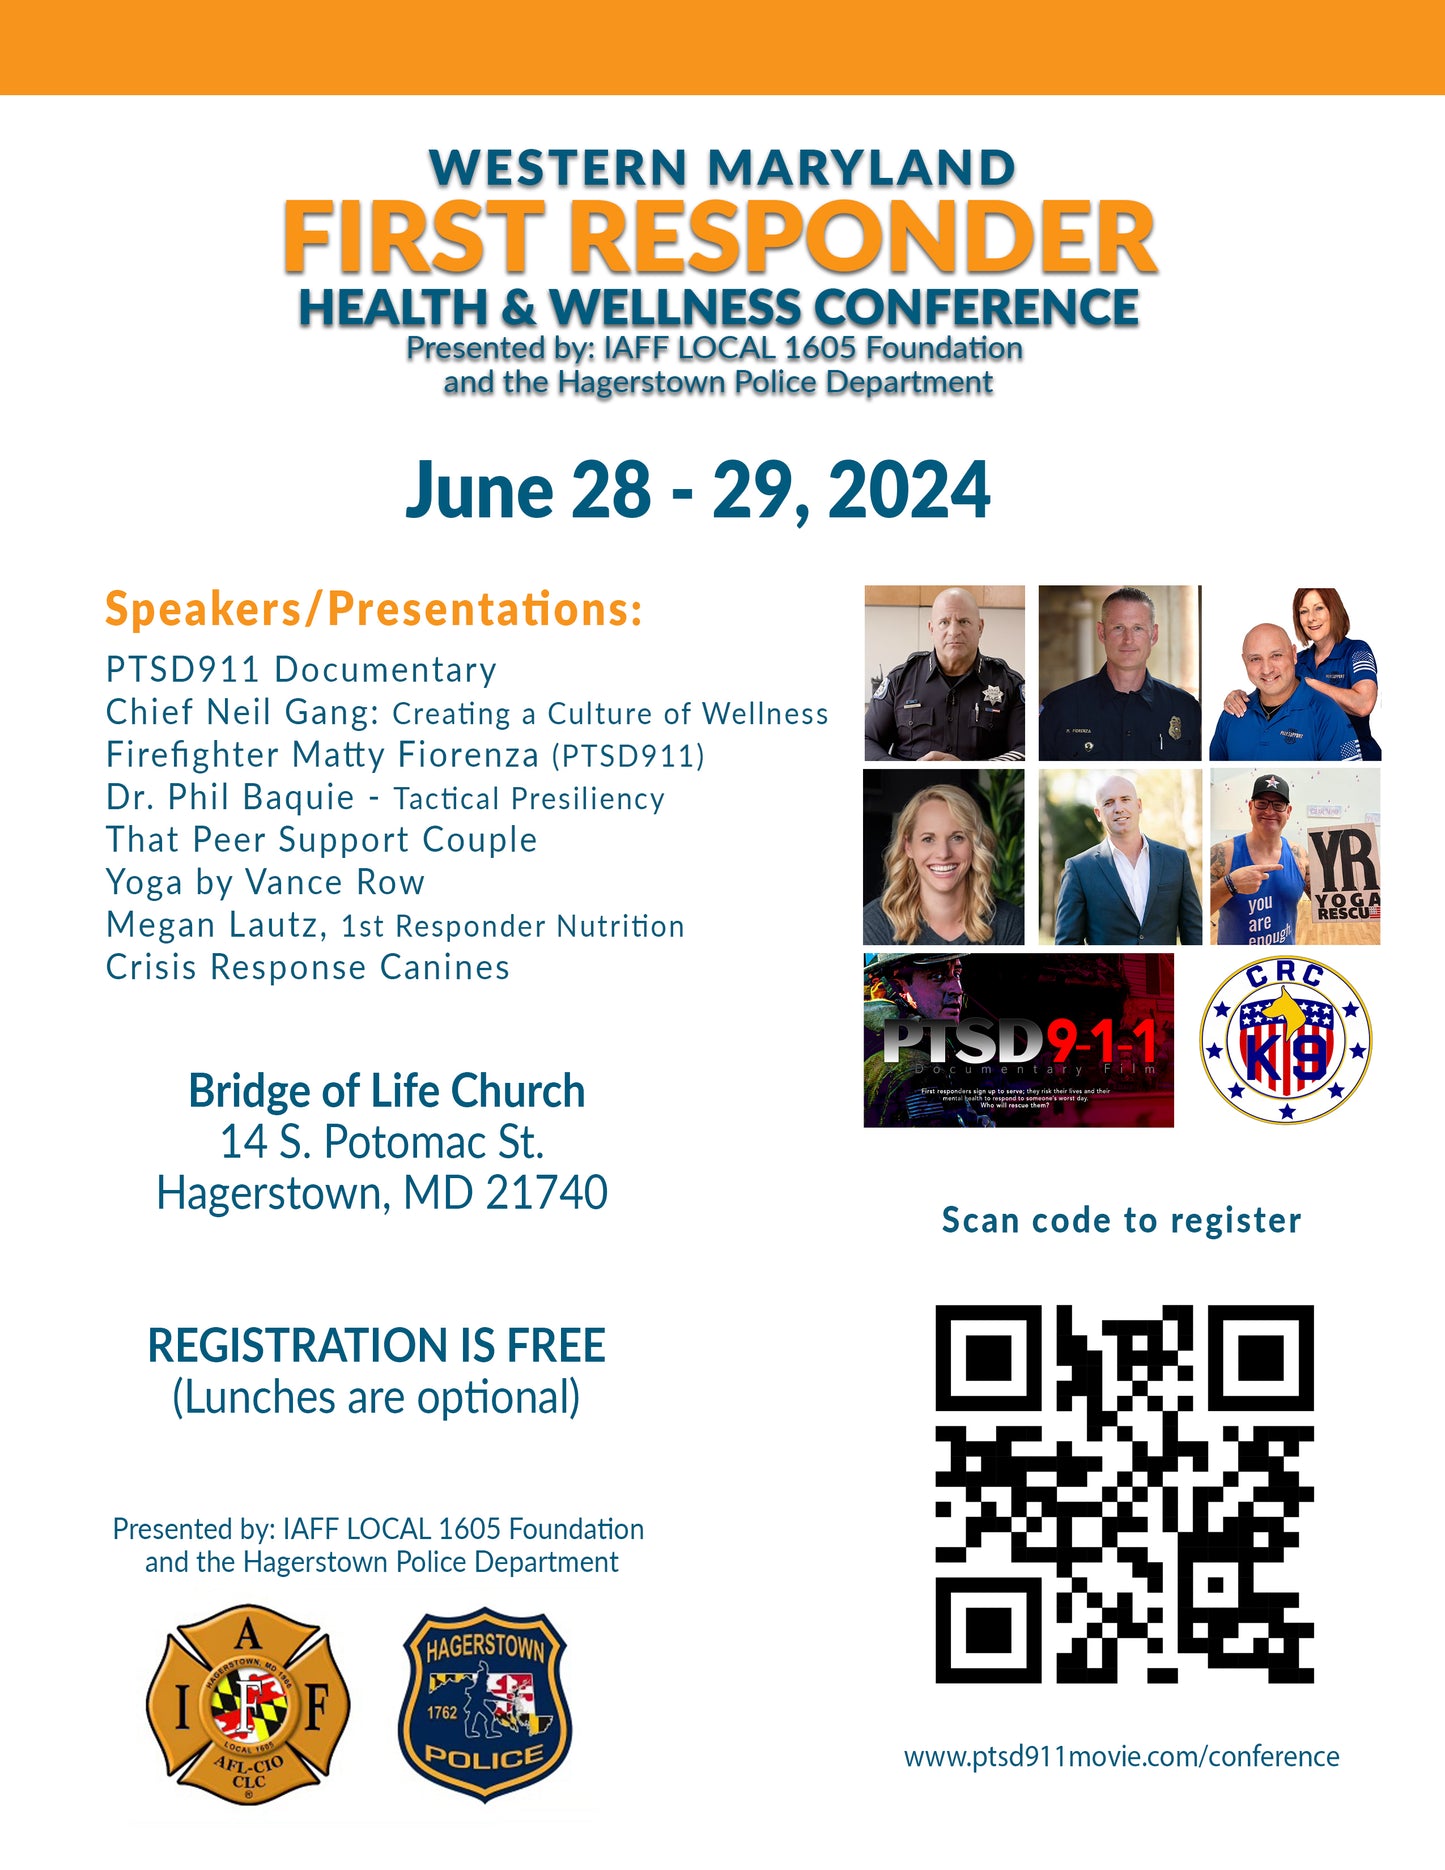 Western Maryland First Responder Health and Wellness Conference